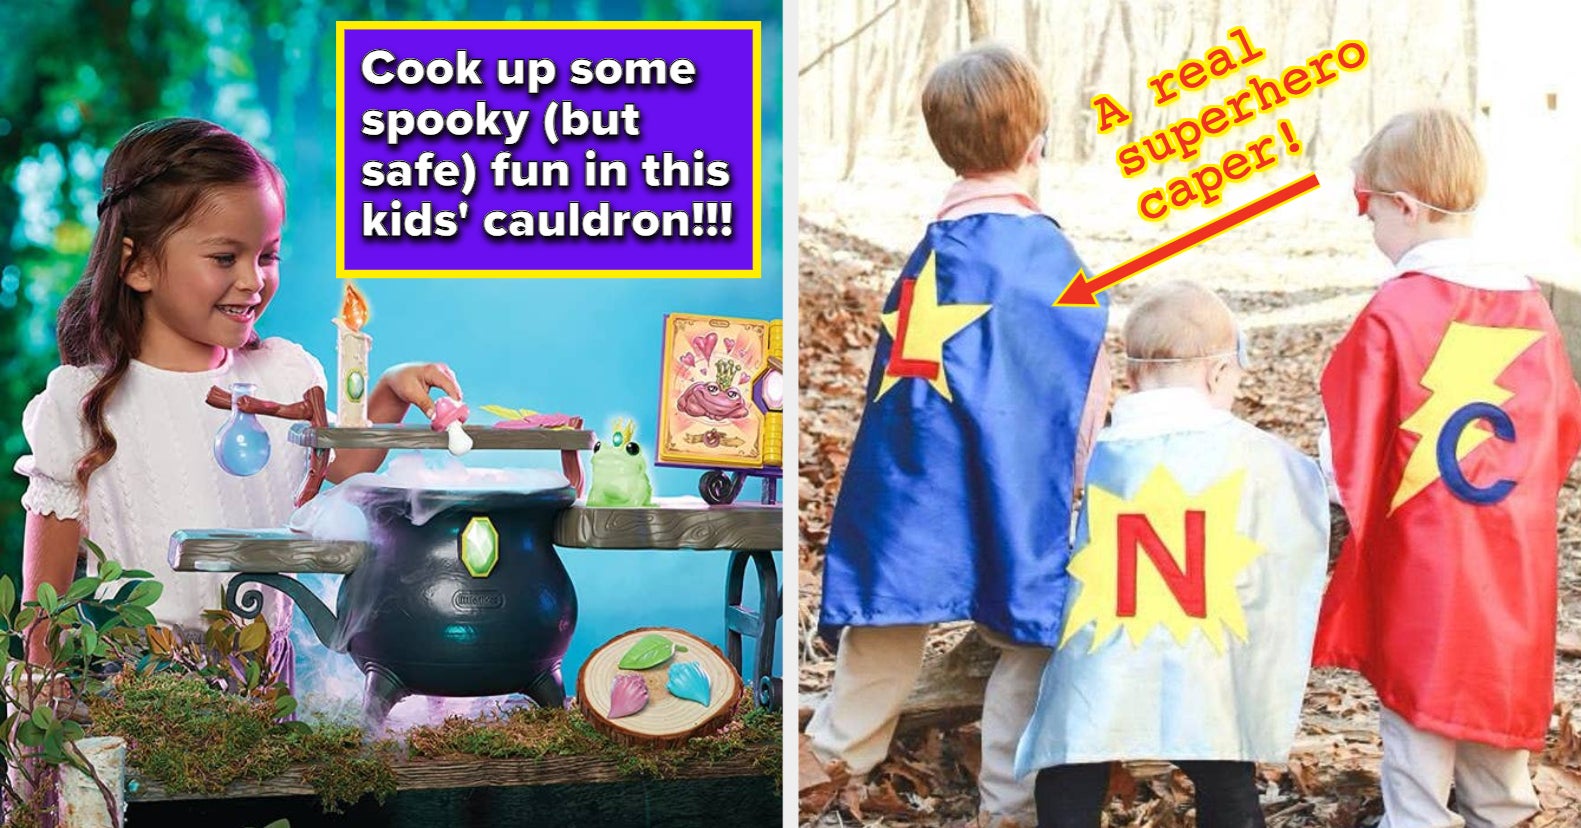 26 Pretend Play Products To Inspire Kids' Imaginations